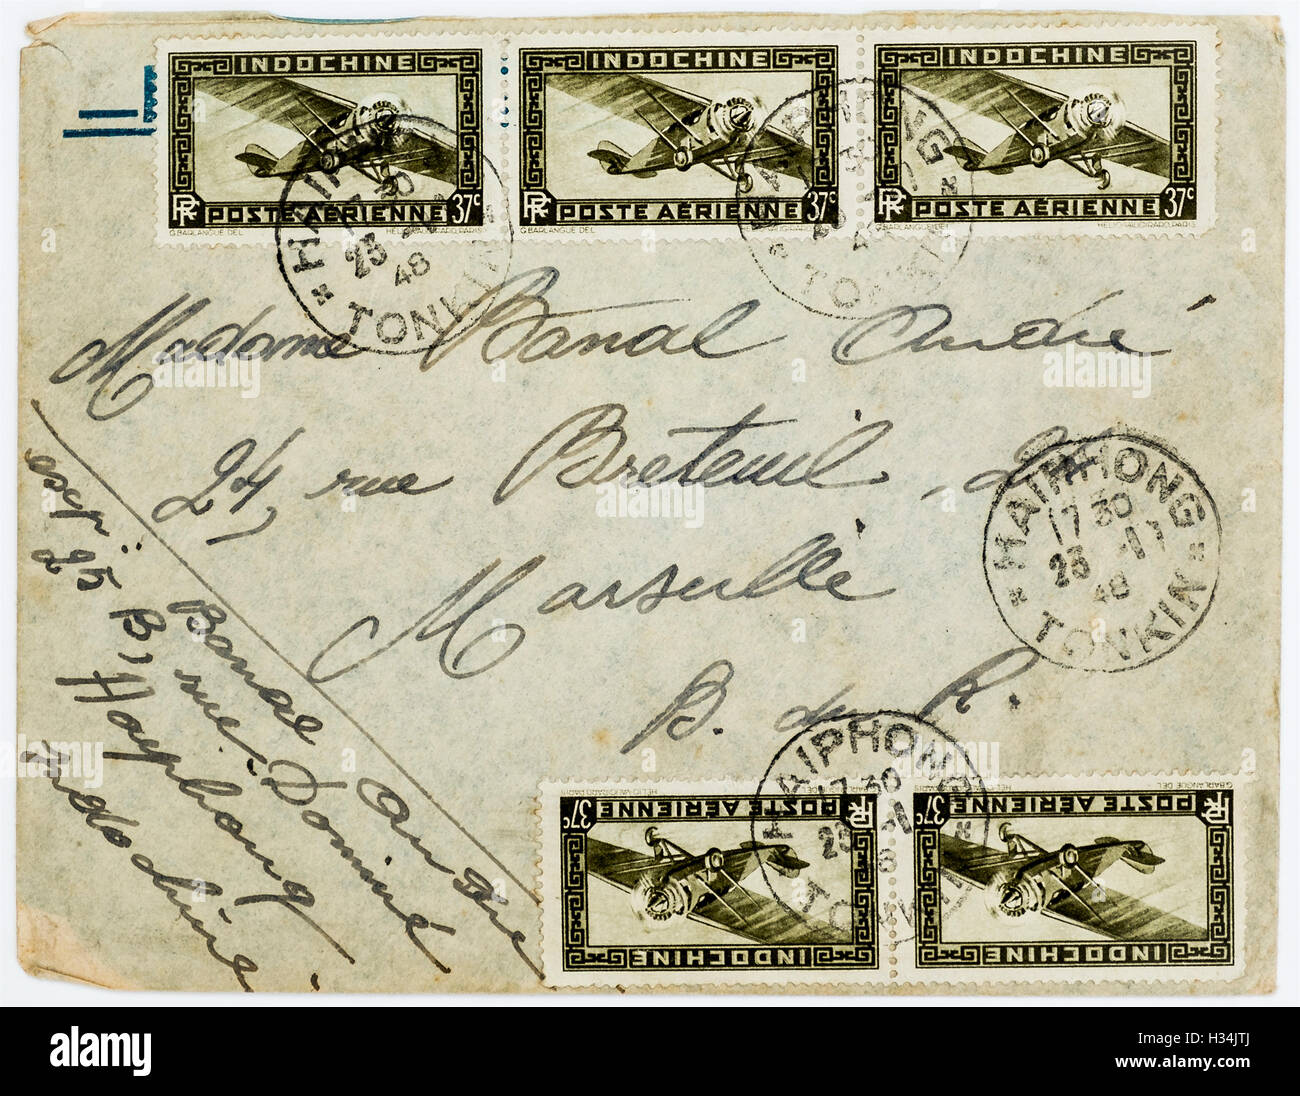 1948 Indo-China air-mail letter from Haiphong Tonkin addressed to France. Stock Photo